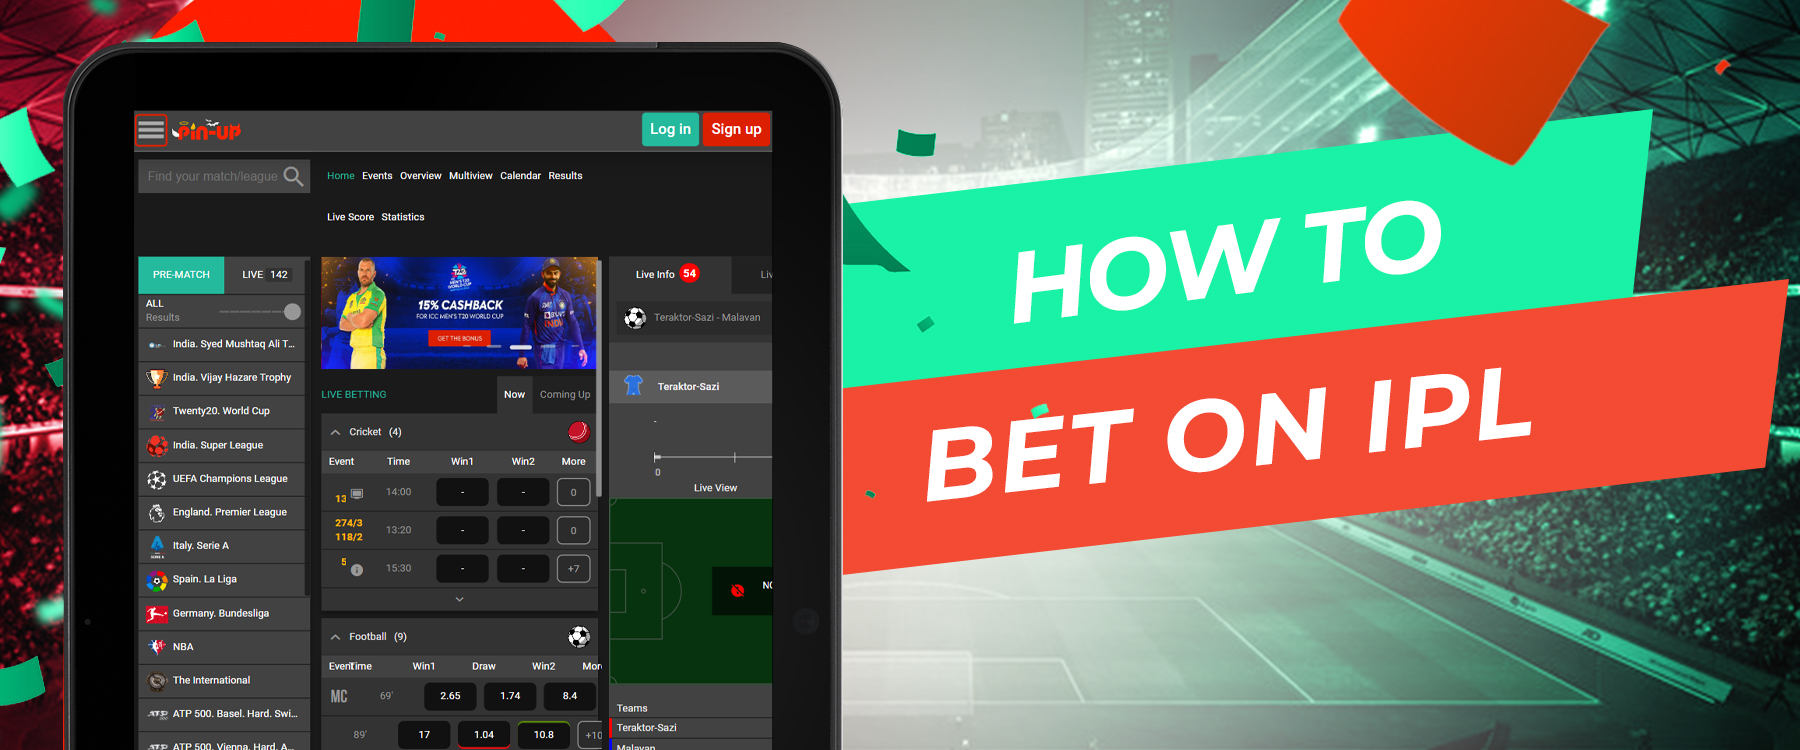 Step-by-step instructions on how to bet on IPL on Pin Up